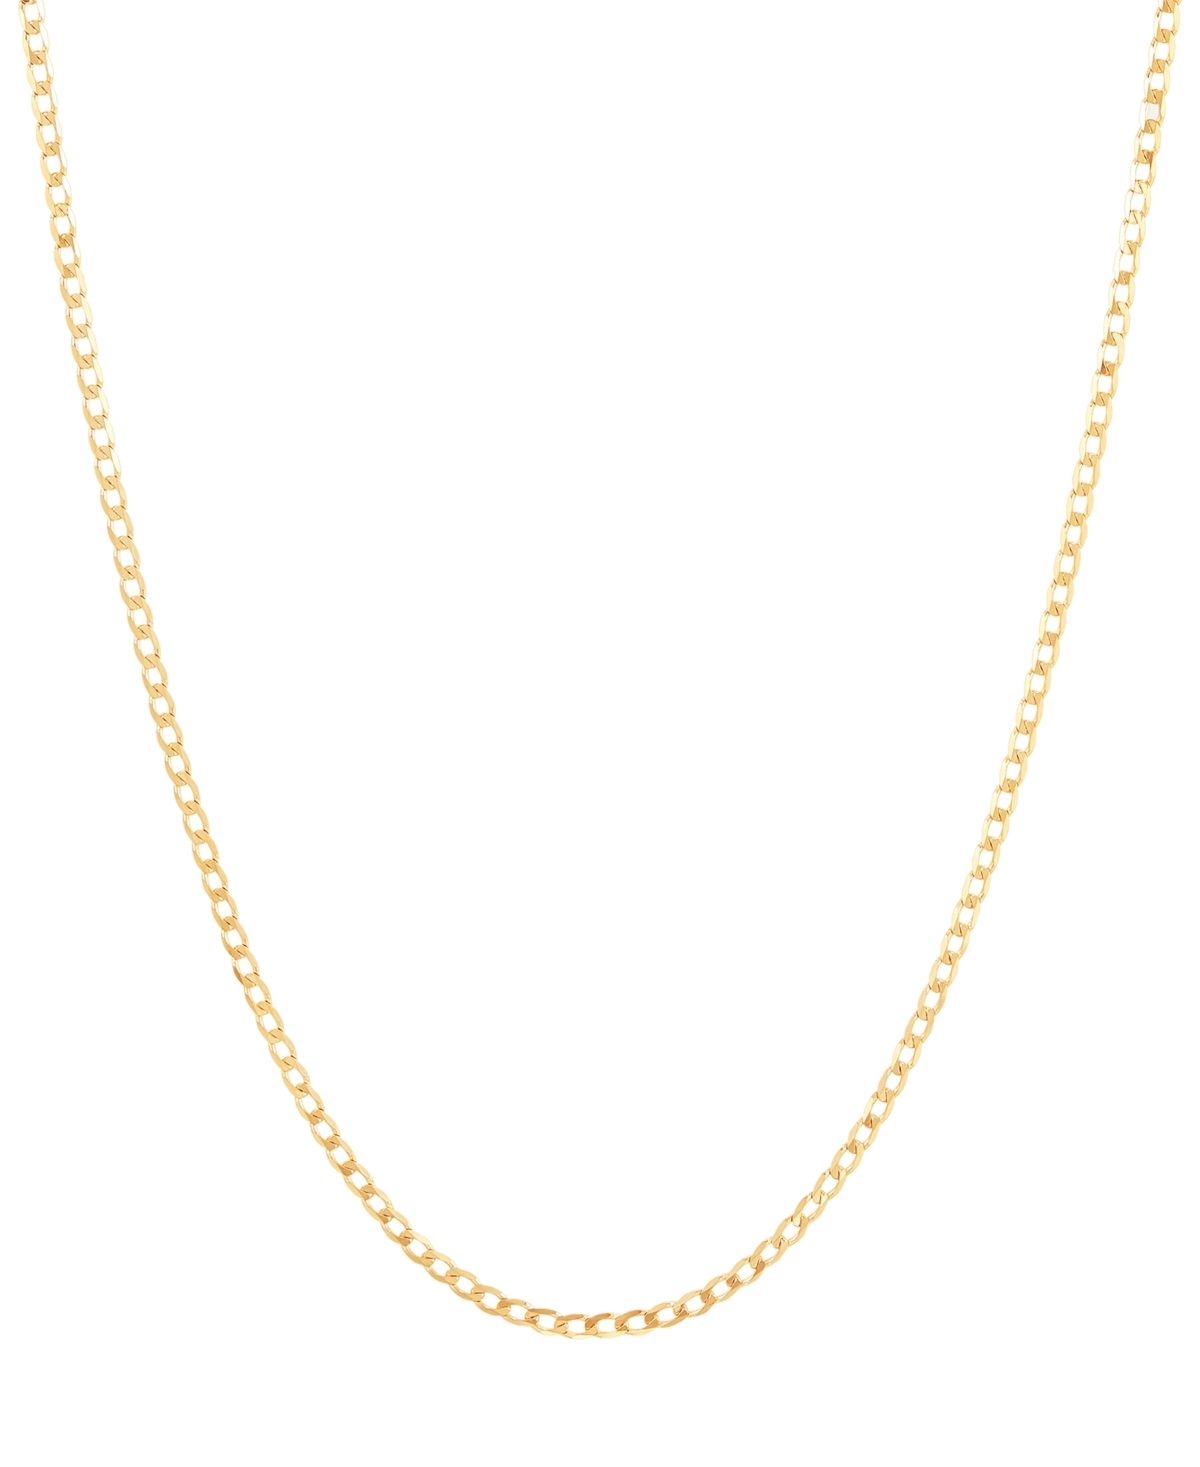 Polished 20" Curb Chain in Solid 10K Yellow Gold - Yellow Gold